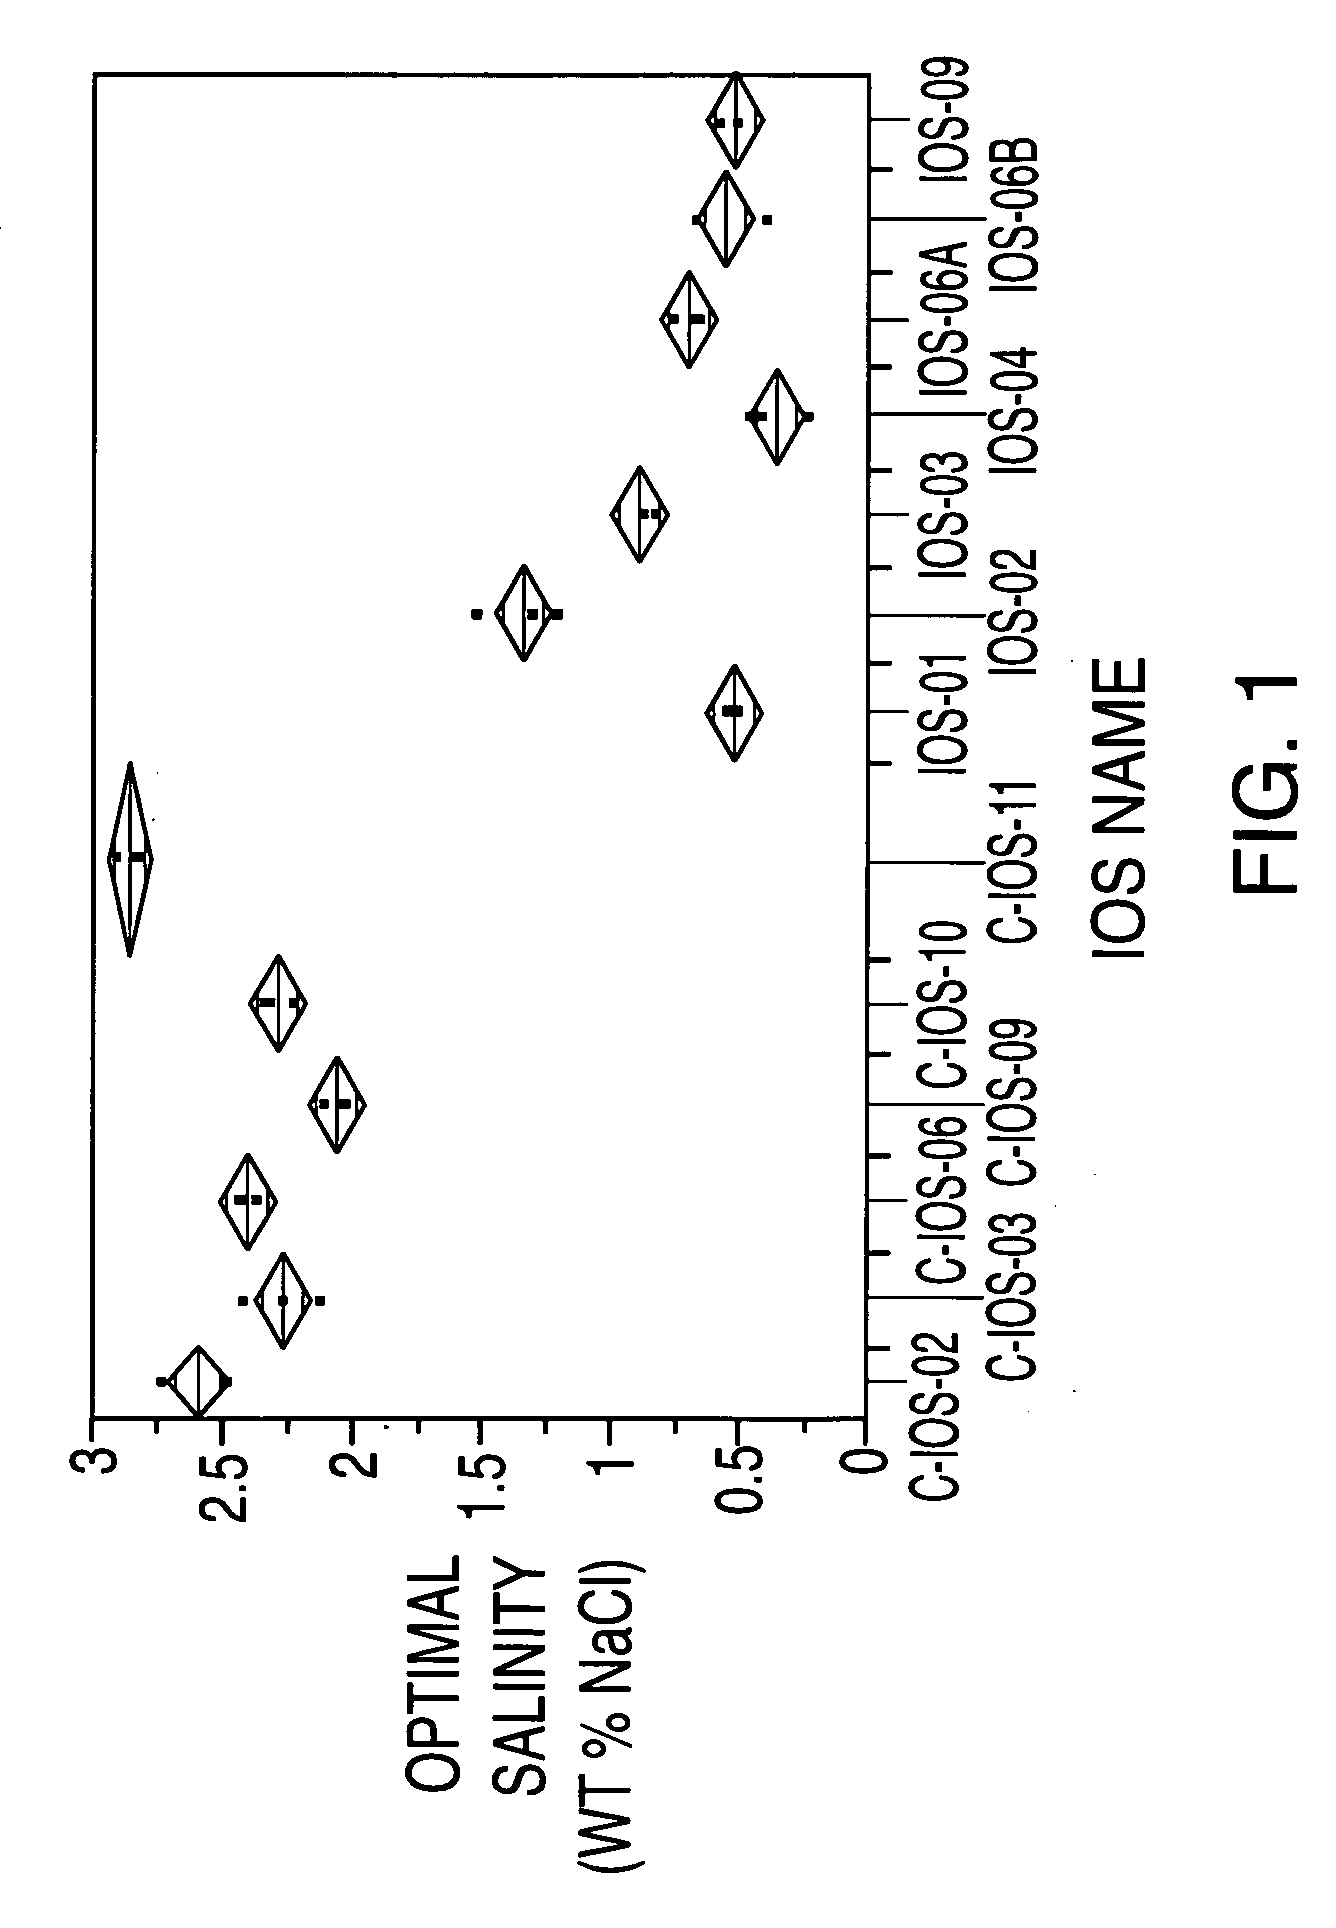 Sulfonated internal olefin surfactant for enhanced oil recovery